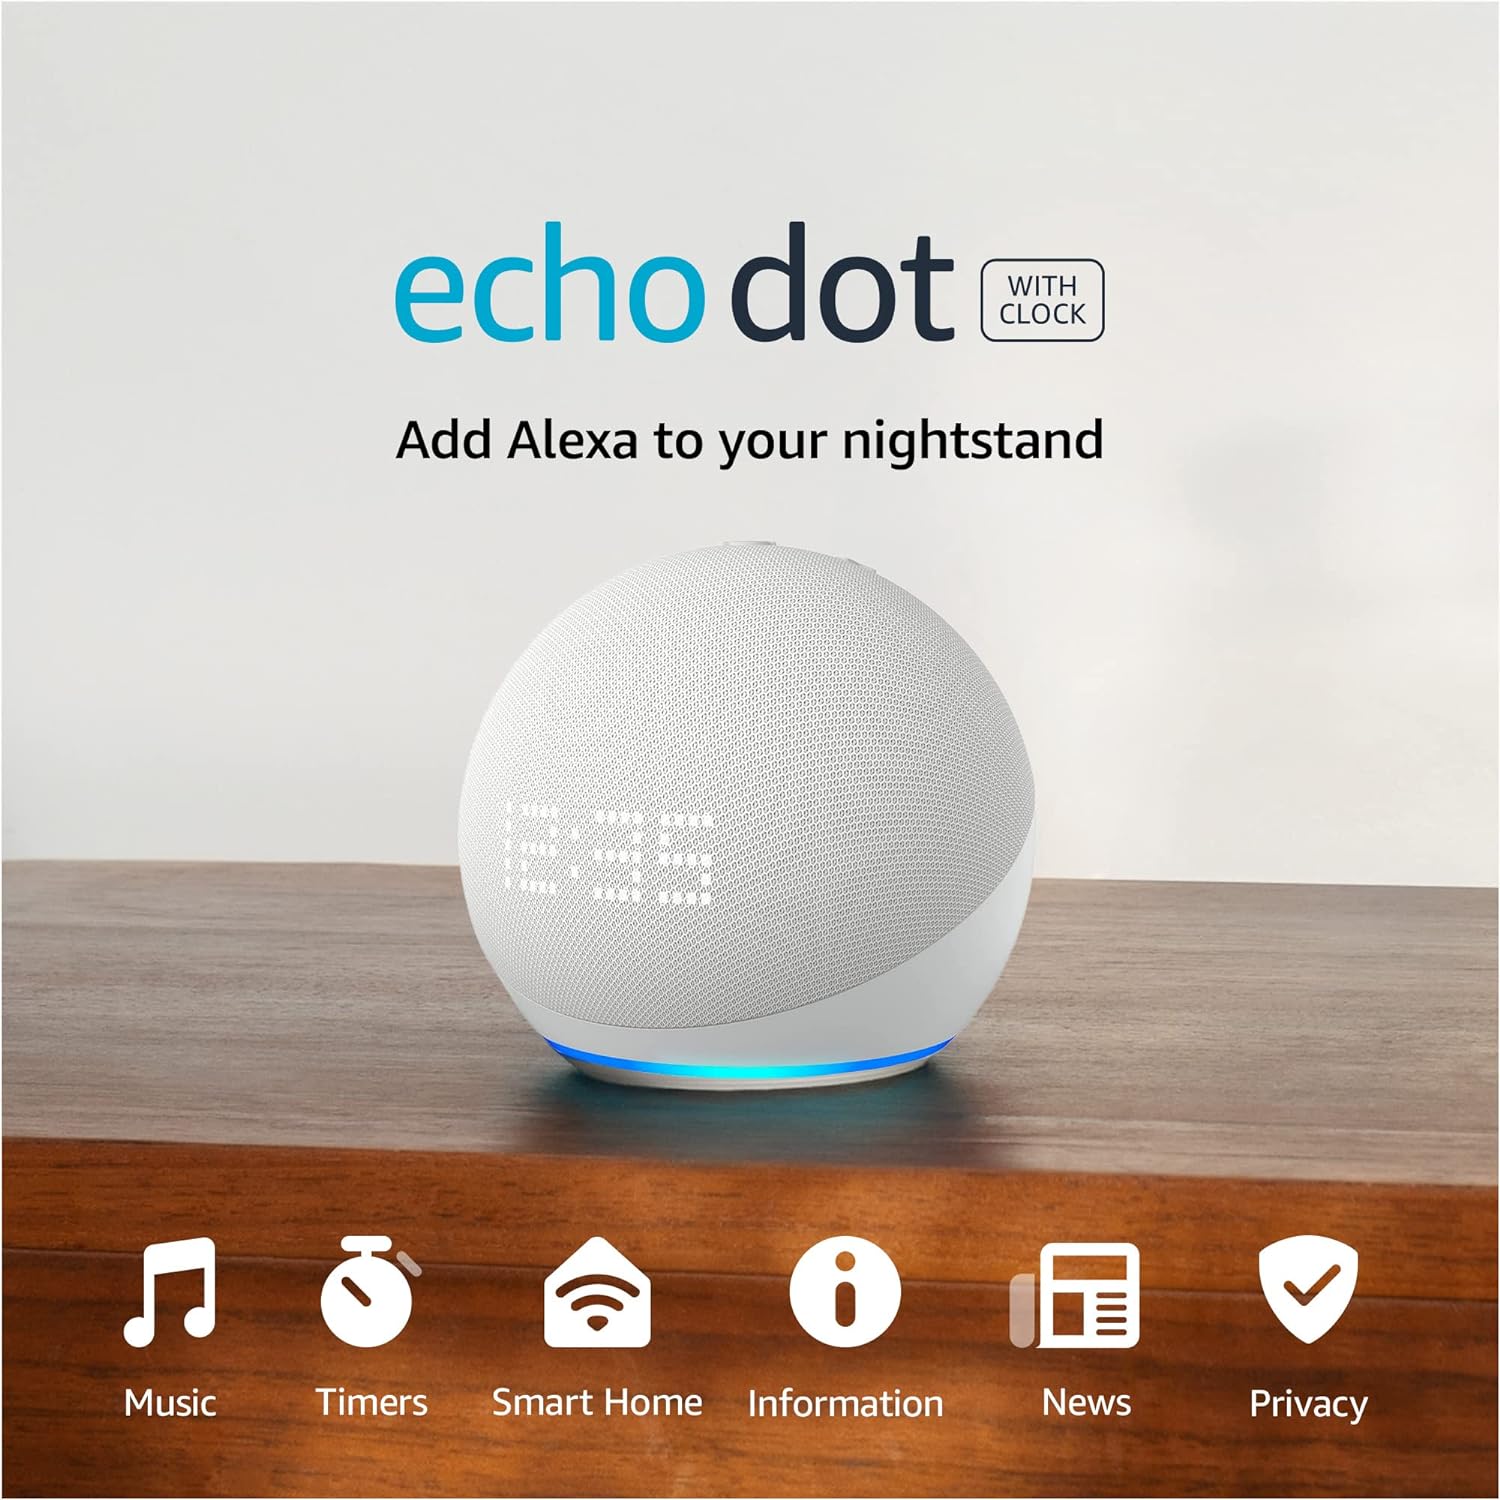 the echo dot smart home speaker with clock from amazon